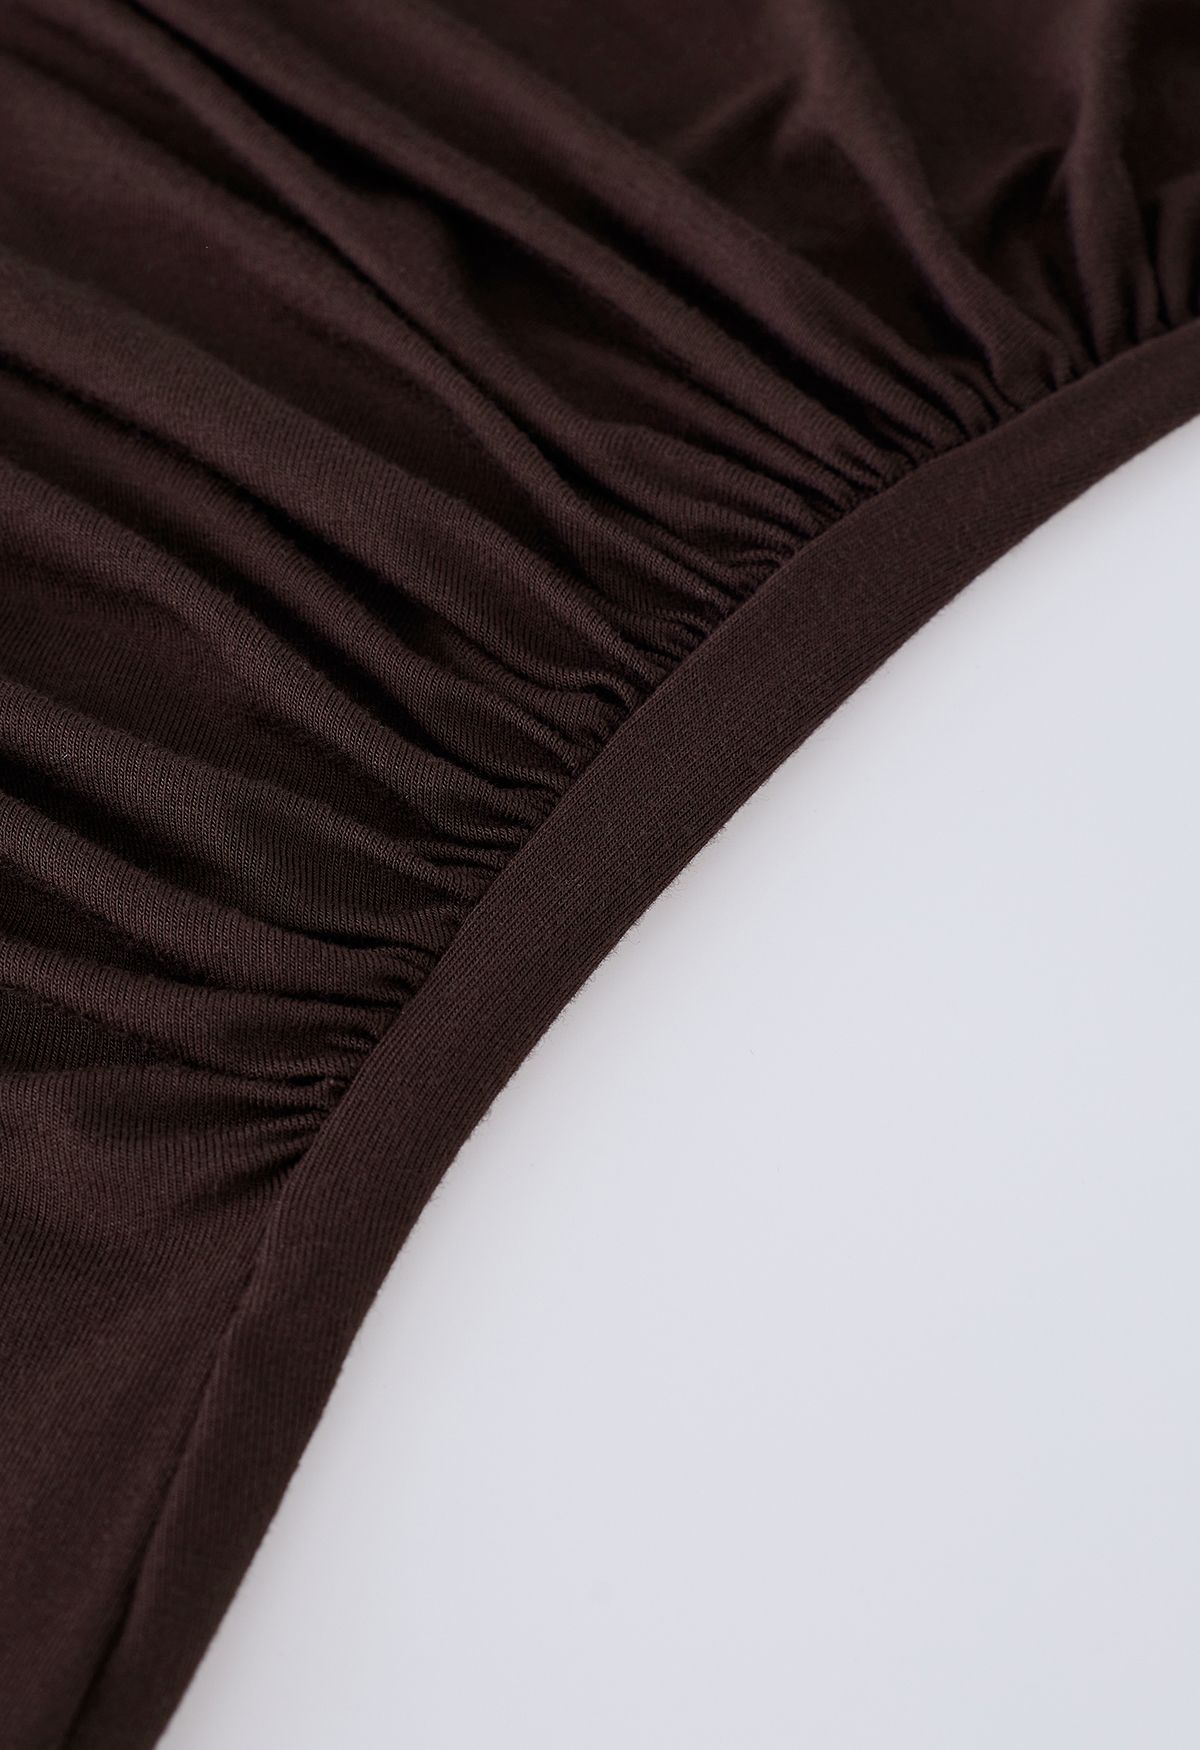 Ruched Detail Sleeveless Top in Brown - Retro, Indie and Unique Fashion